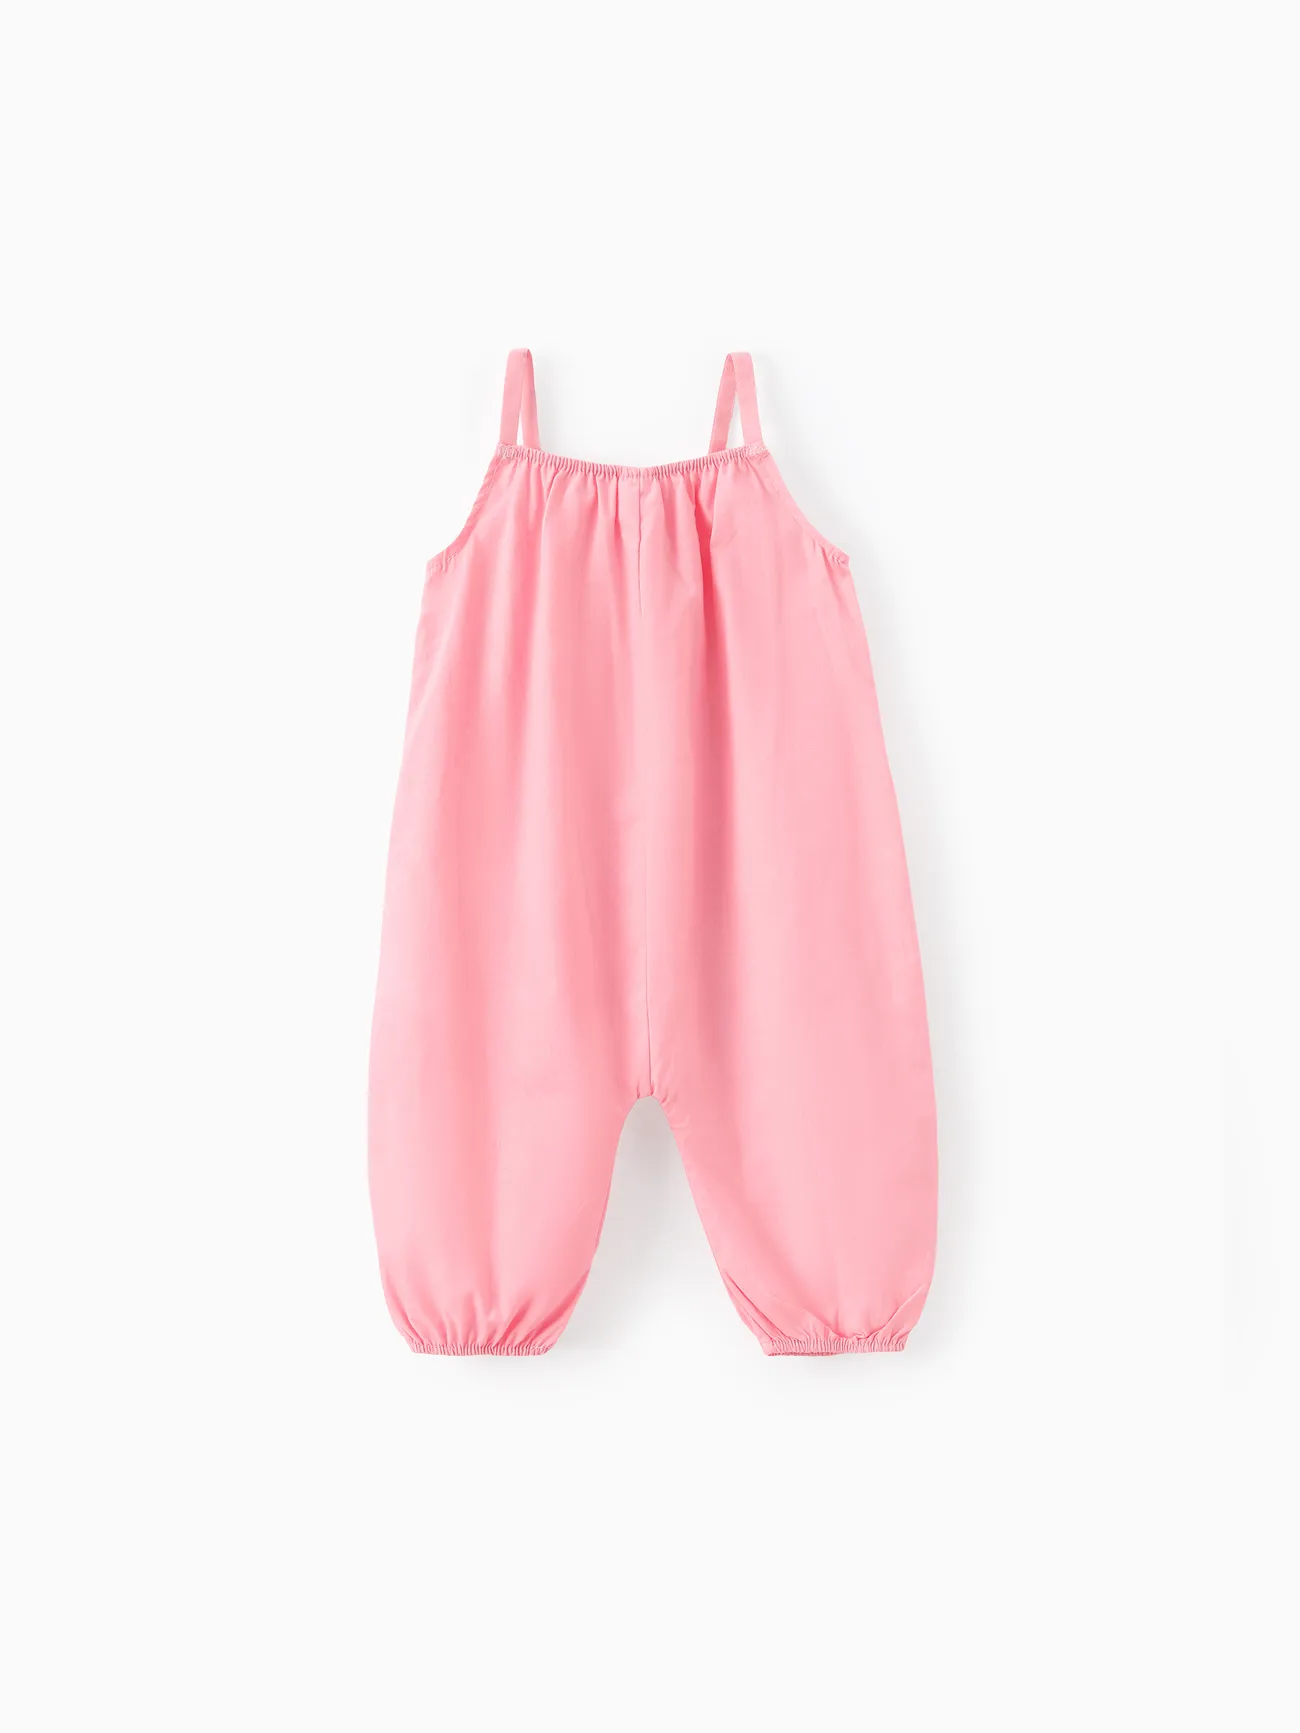 Cotton Loose-fit Solid Color Lightweight Jumpsuit for Baby Unisex Pink big image 1